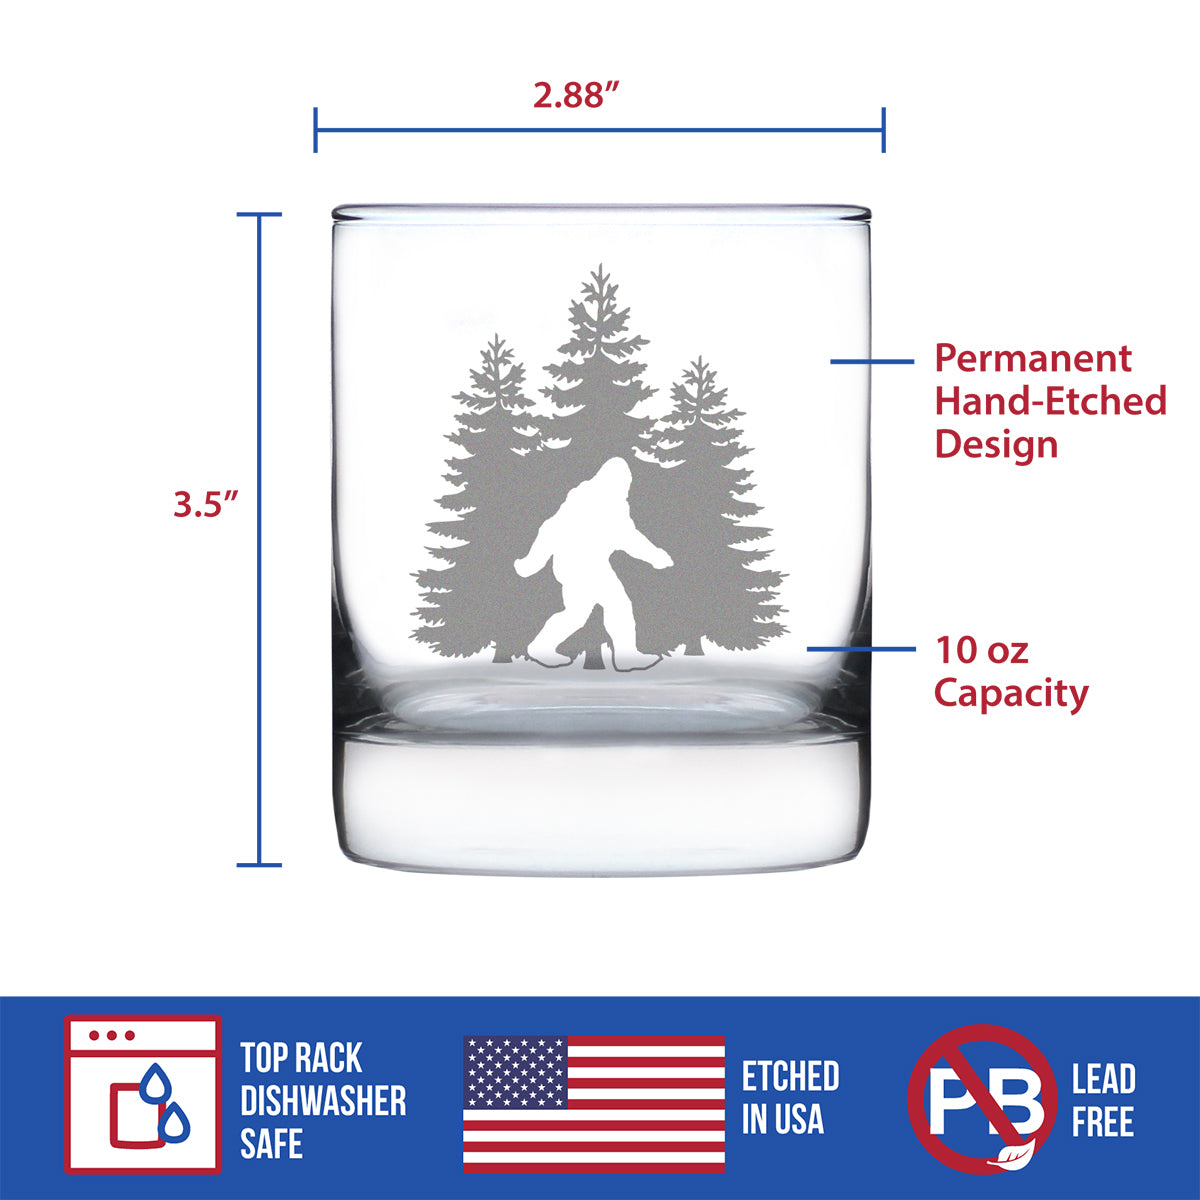 Bigfoot Engraved 10 Oz Rocks or Old Fashioned Whiskey Glass, Unique Sasquatch Themed Gifts, Funny Gift Idea for Outdoorsmen